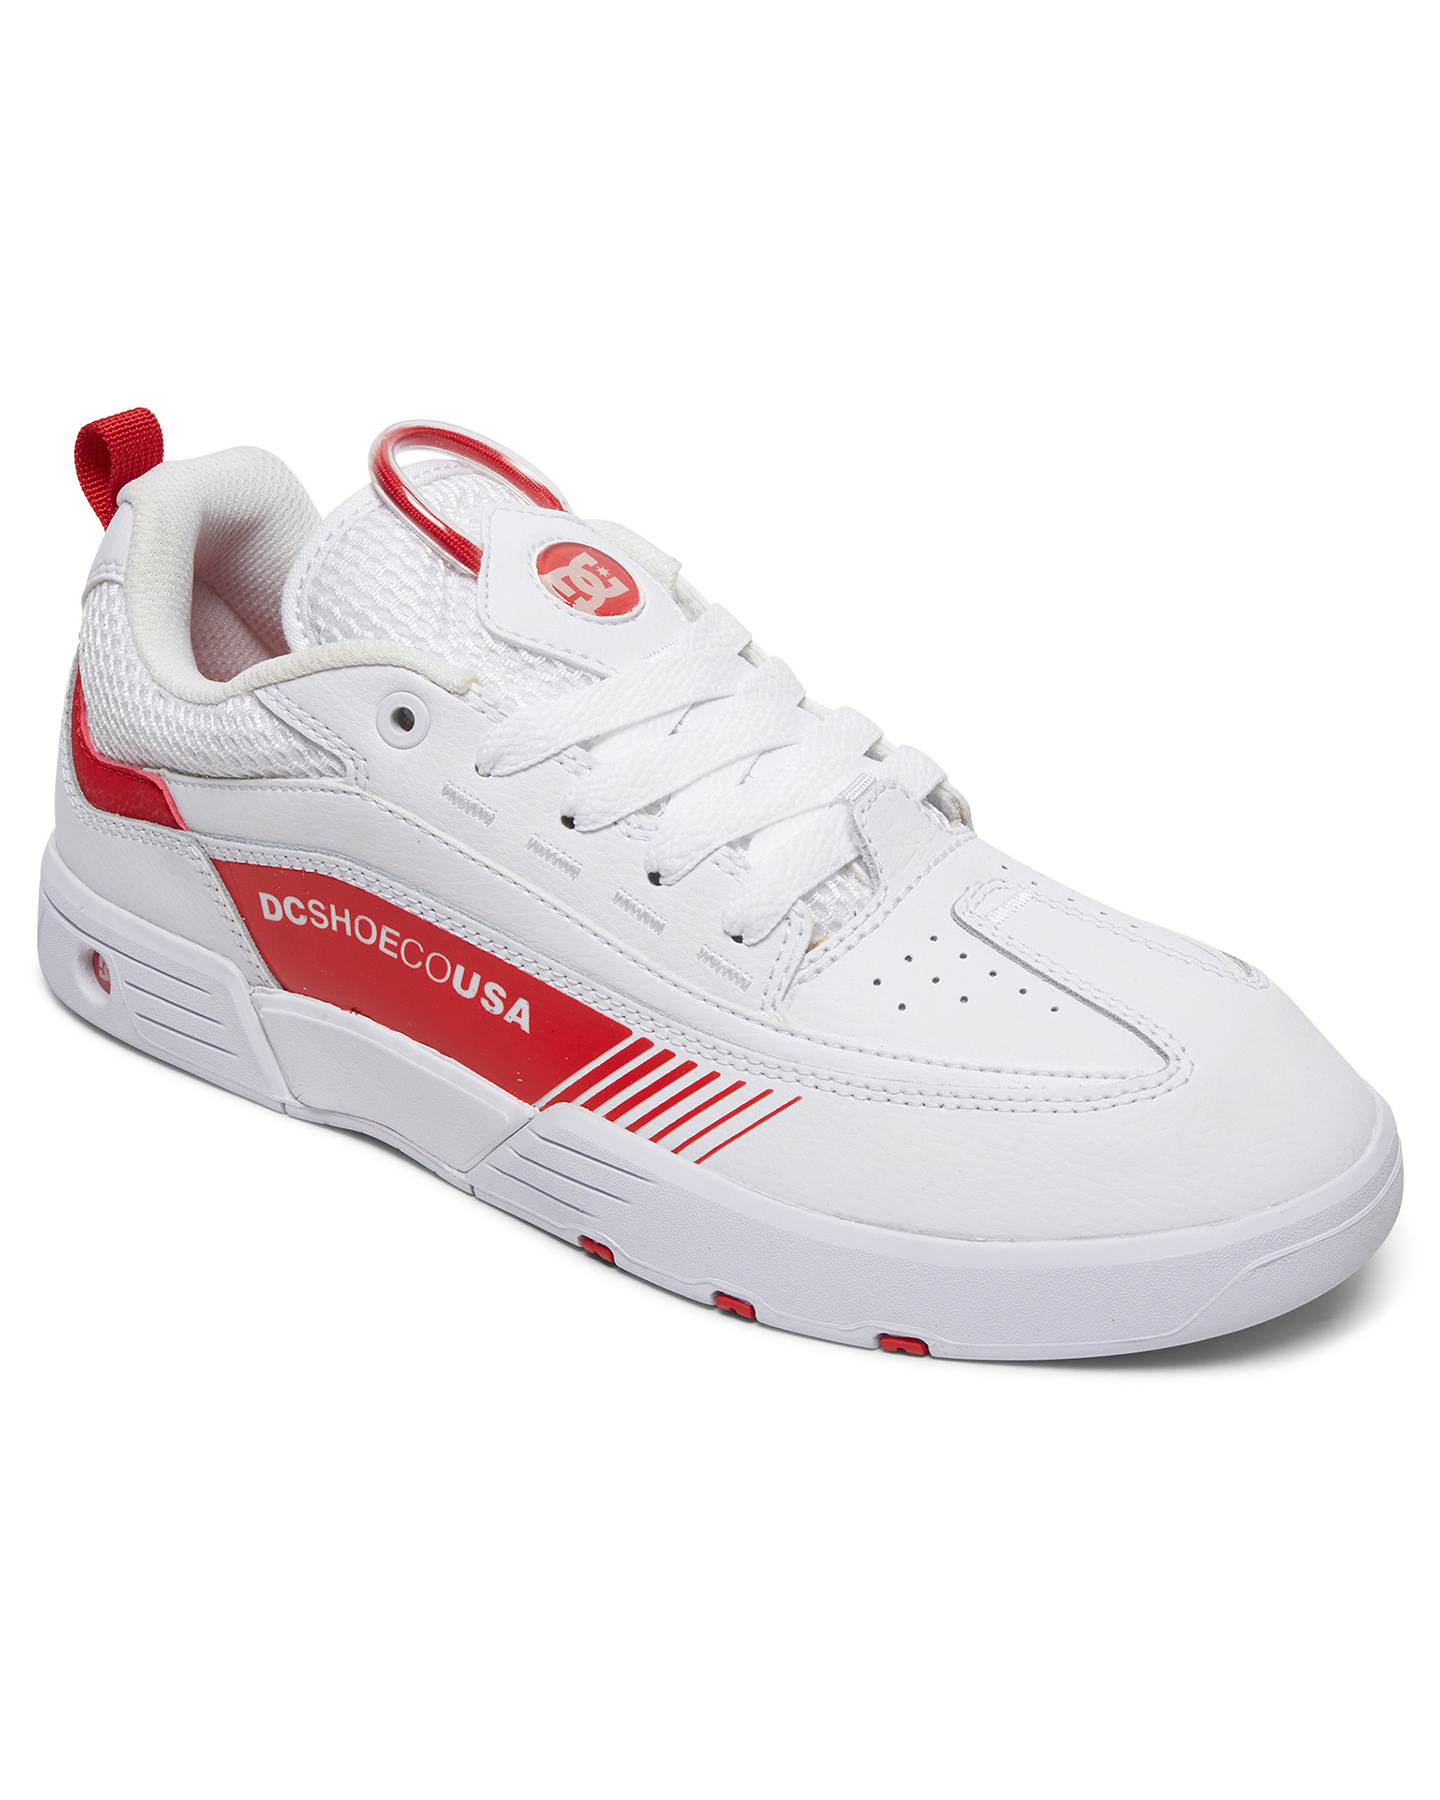 Dc Shoes Mens Legacy 98 Slim Shoe - White/Red | SurfStitch